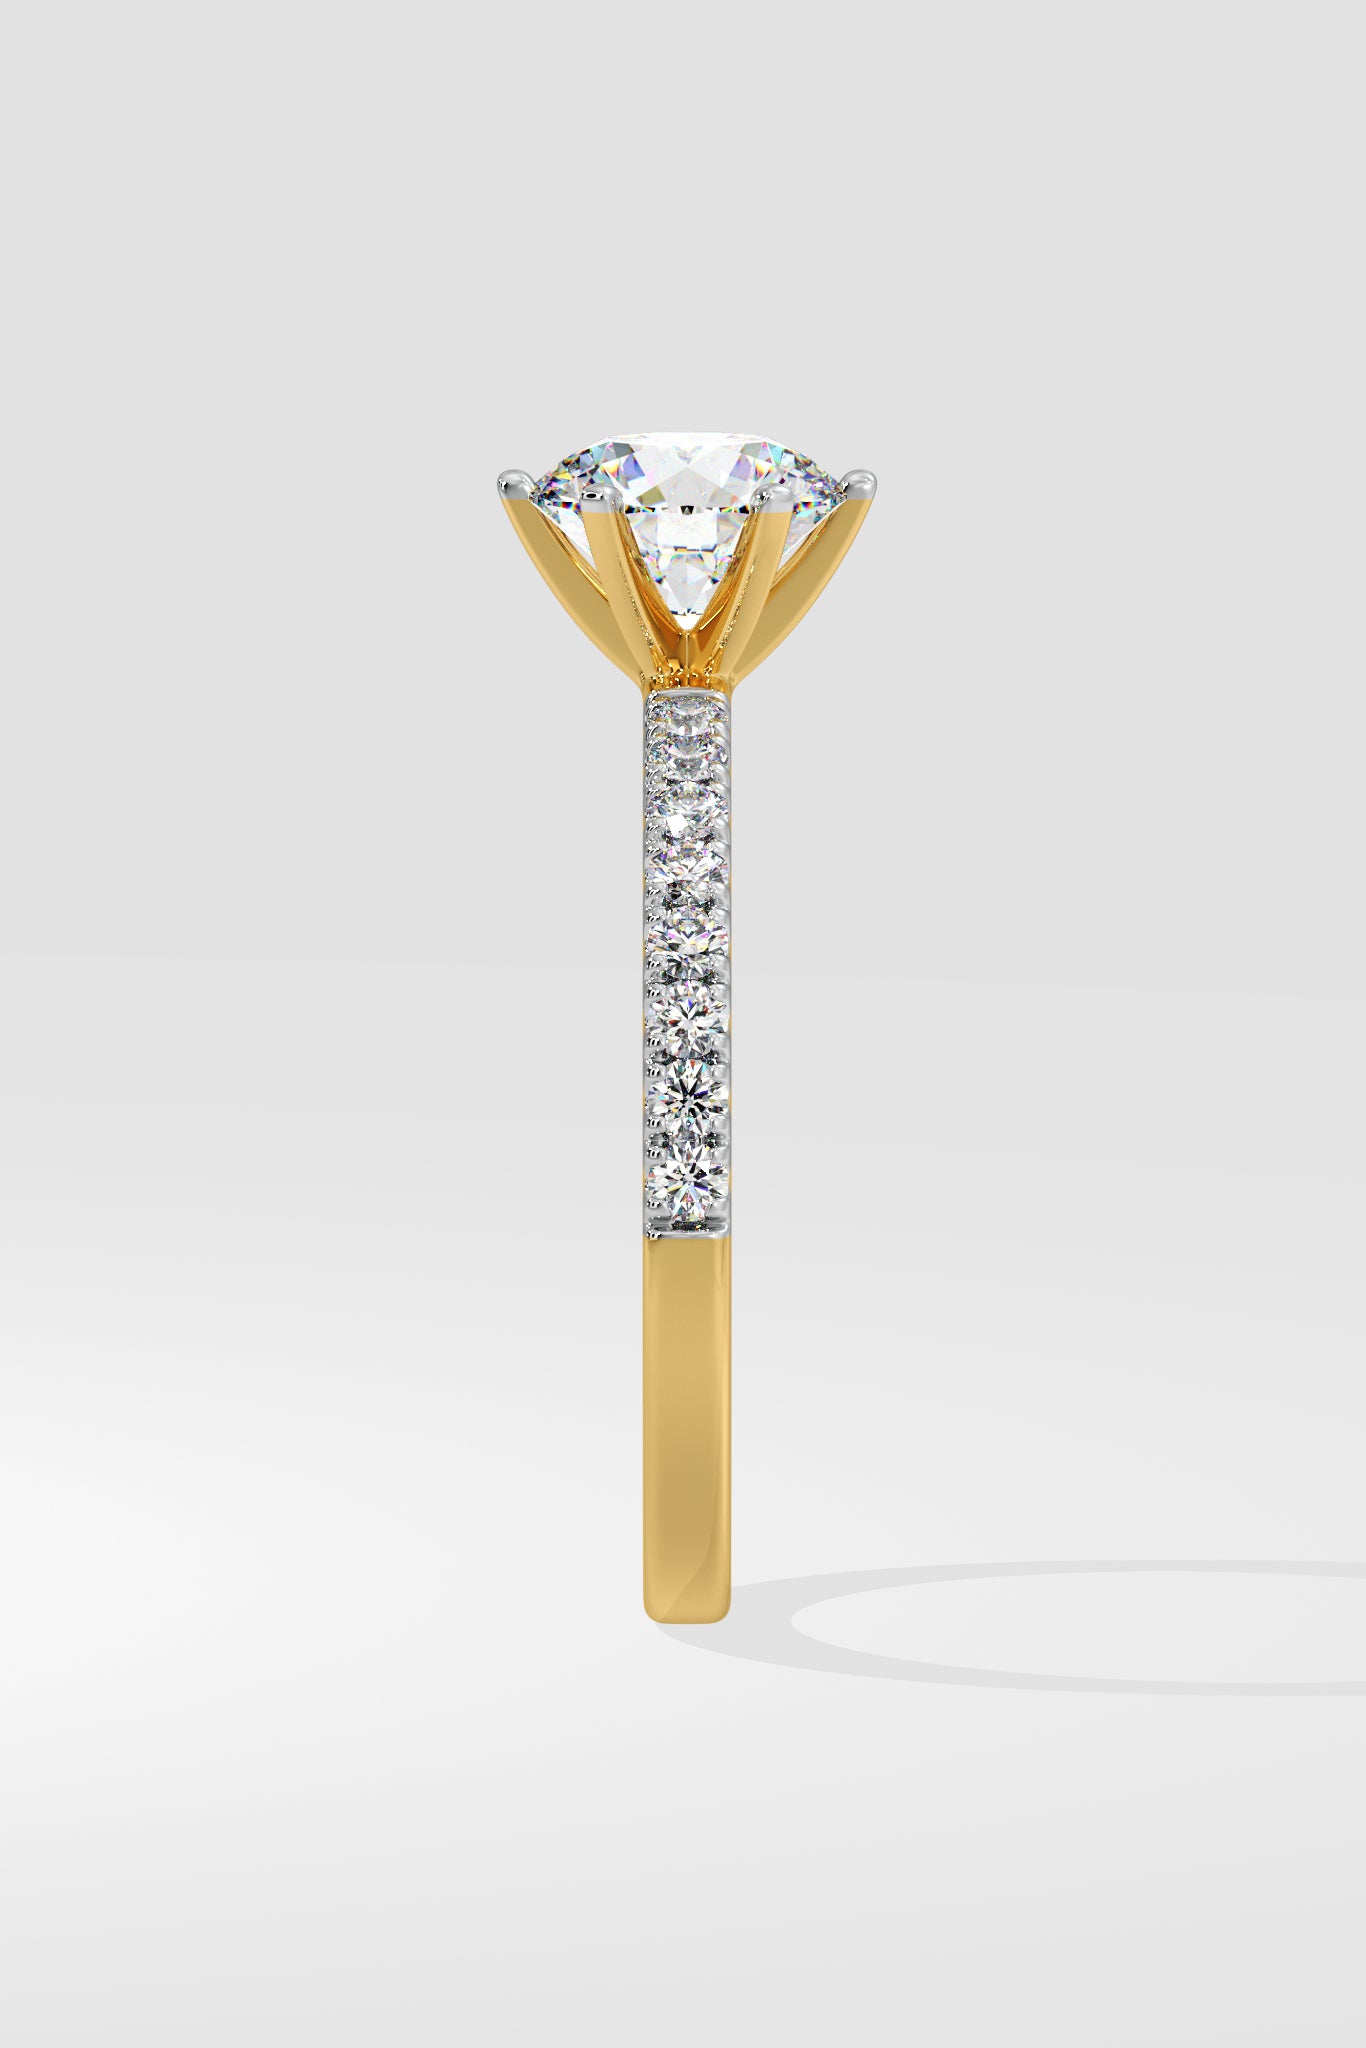 1.5 ct Crown Solitaire Ring